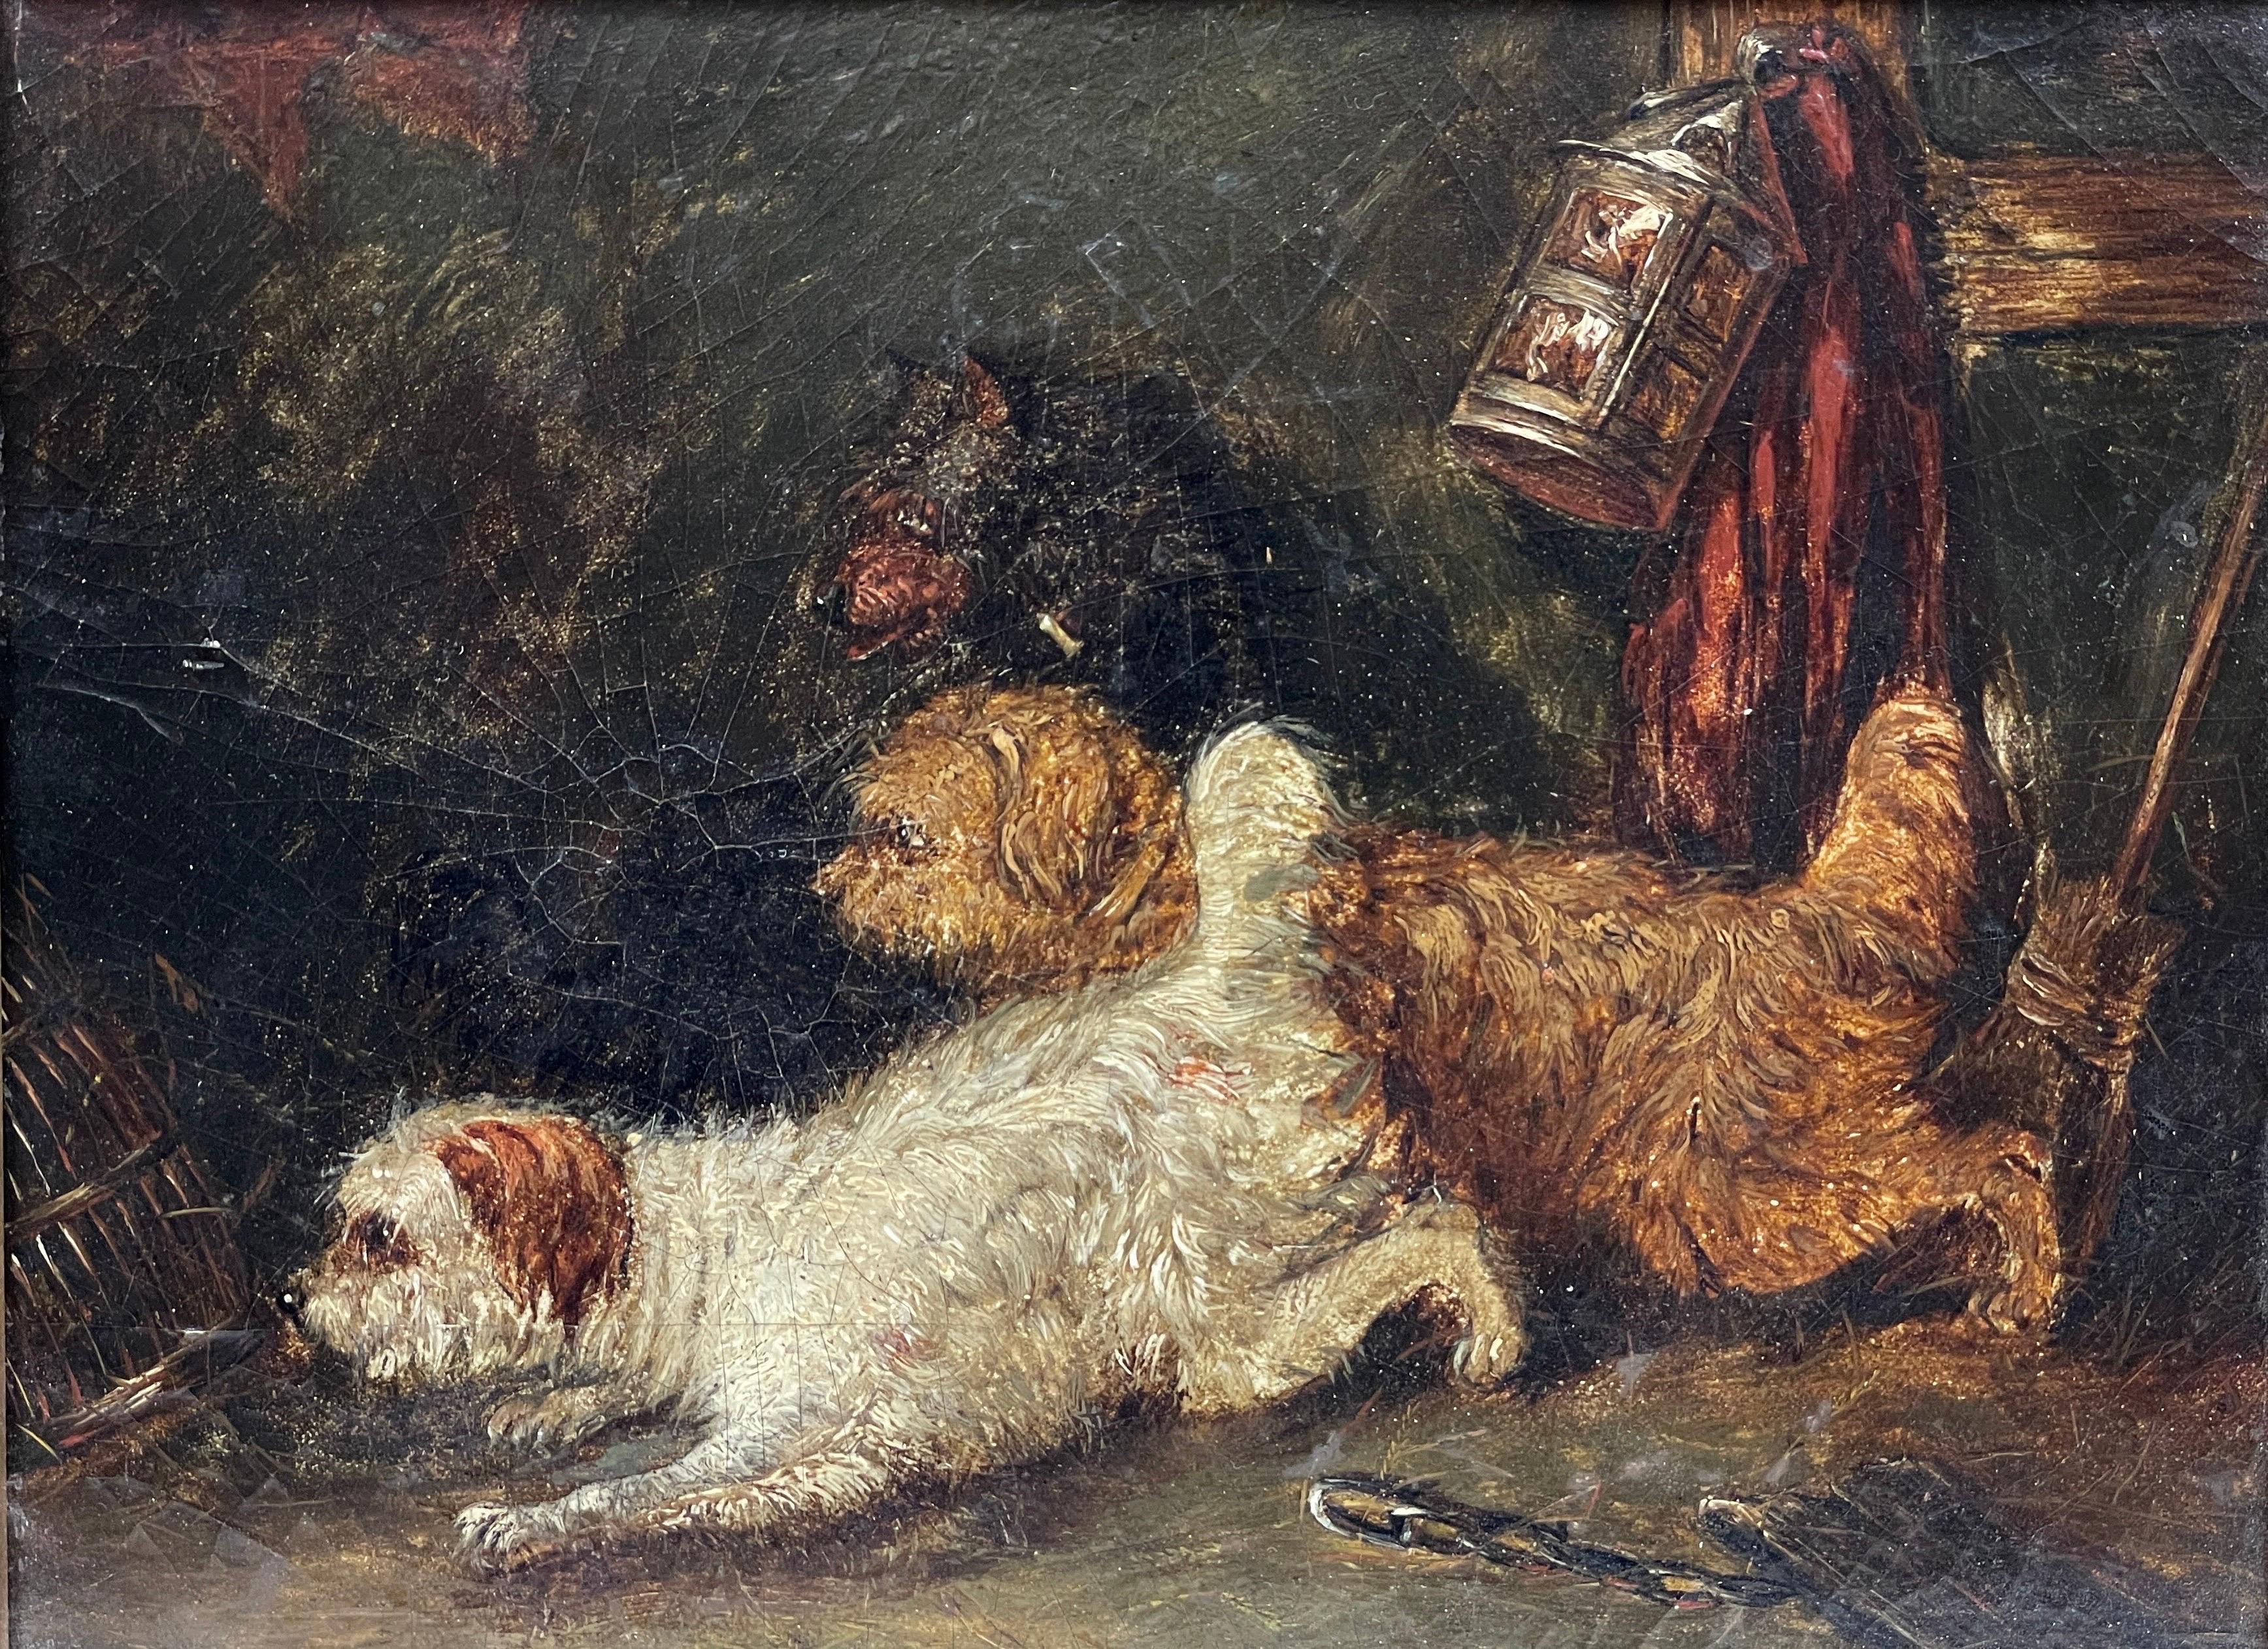 English Antique Interior Painting - 19th Century English Dog Oil Painting Terriers Ratting in Barn Interior